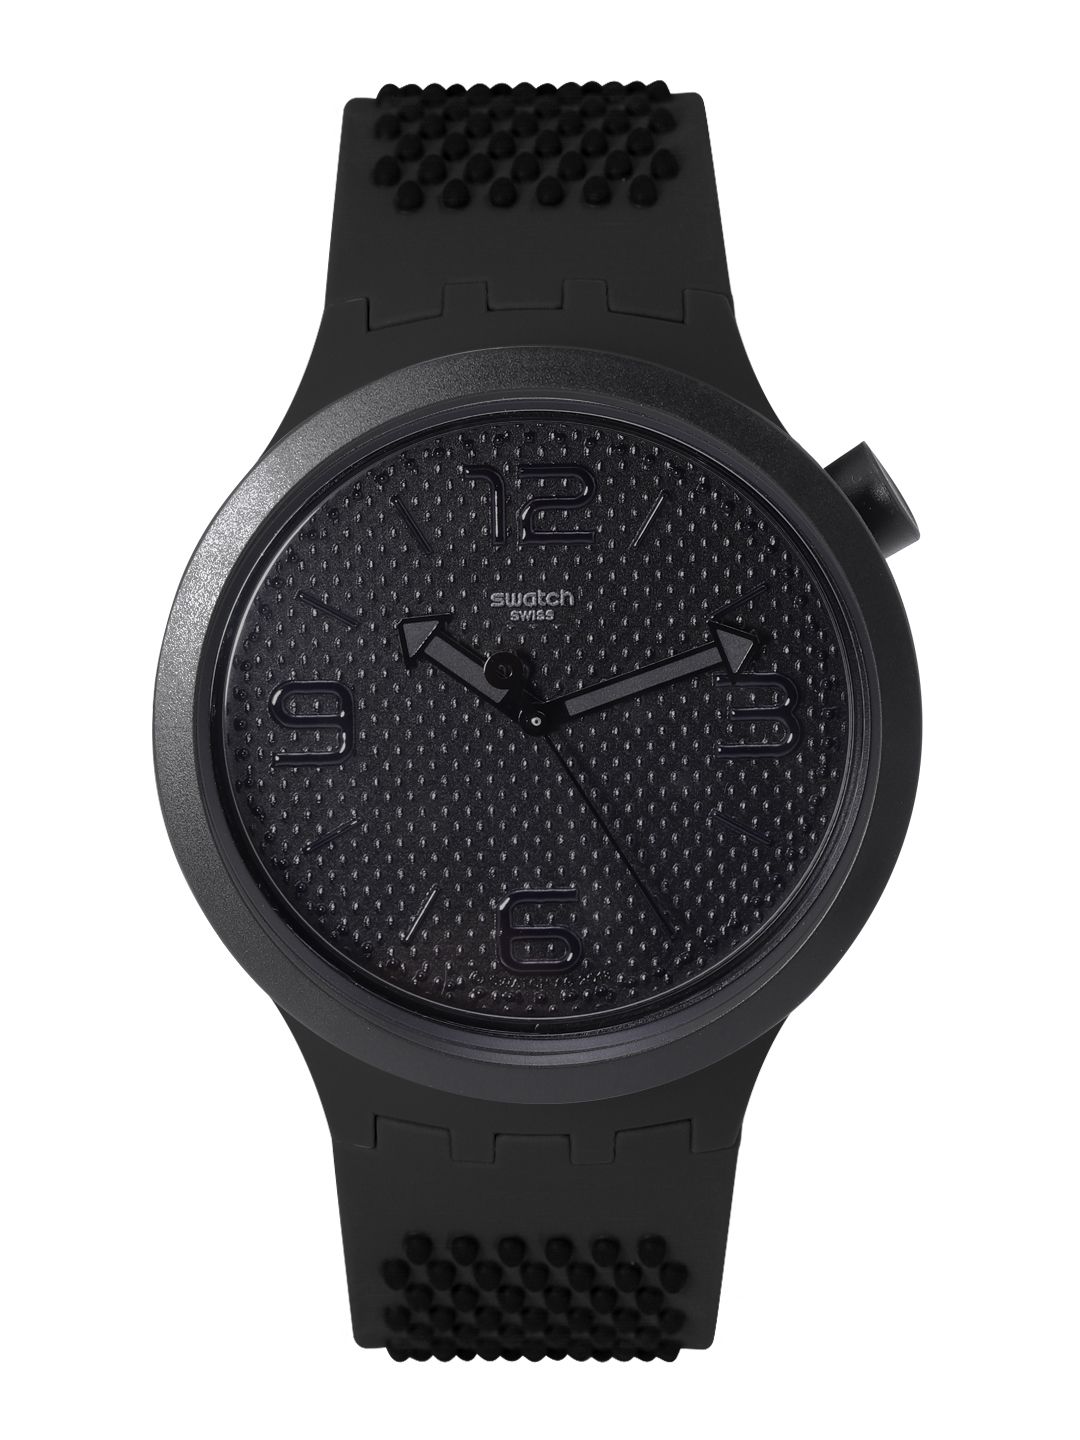 Swatch Unisex Black Swiss Made Water Resistant Analogue Watch SO27B100 Price in India